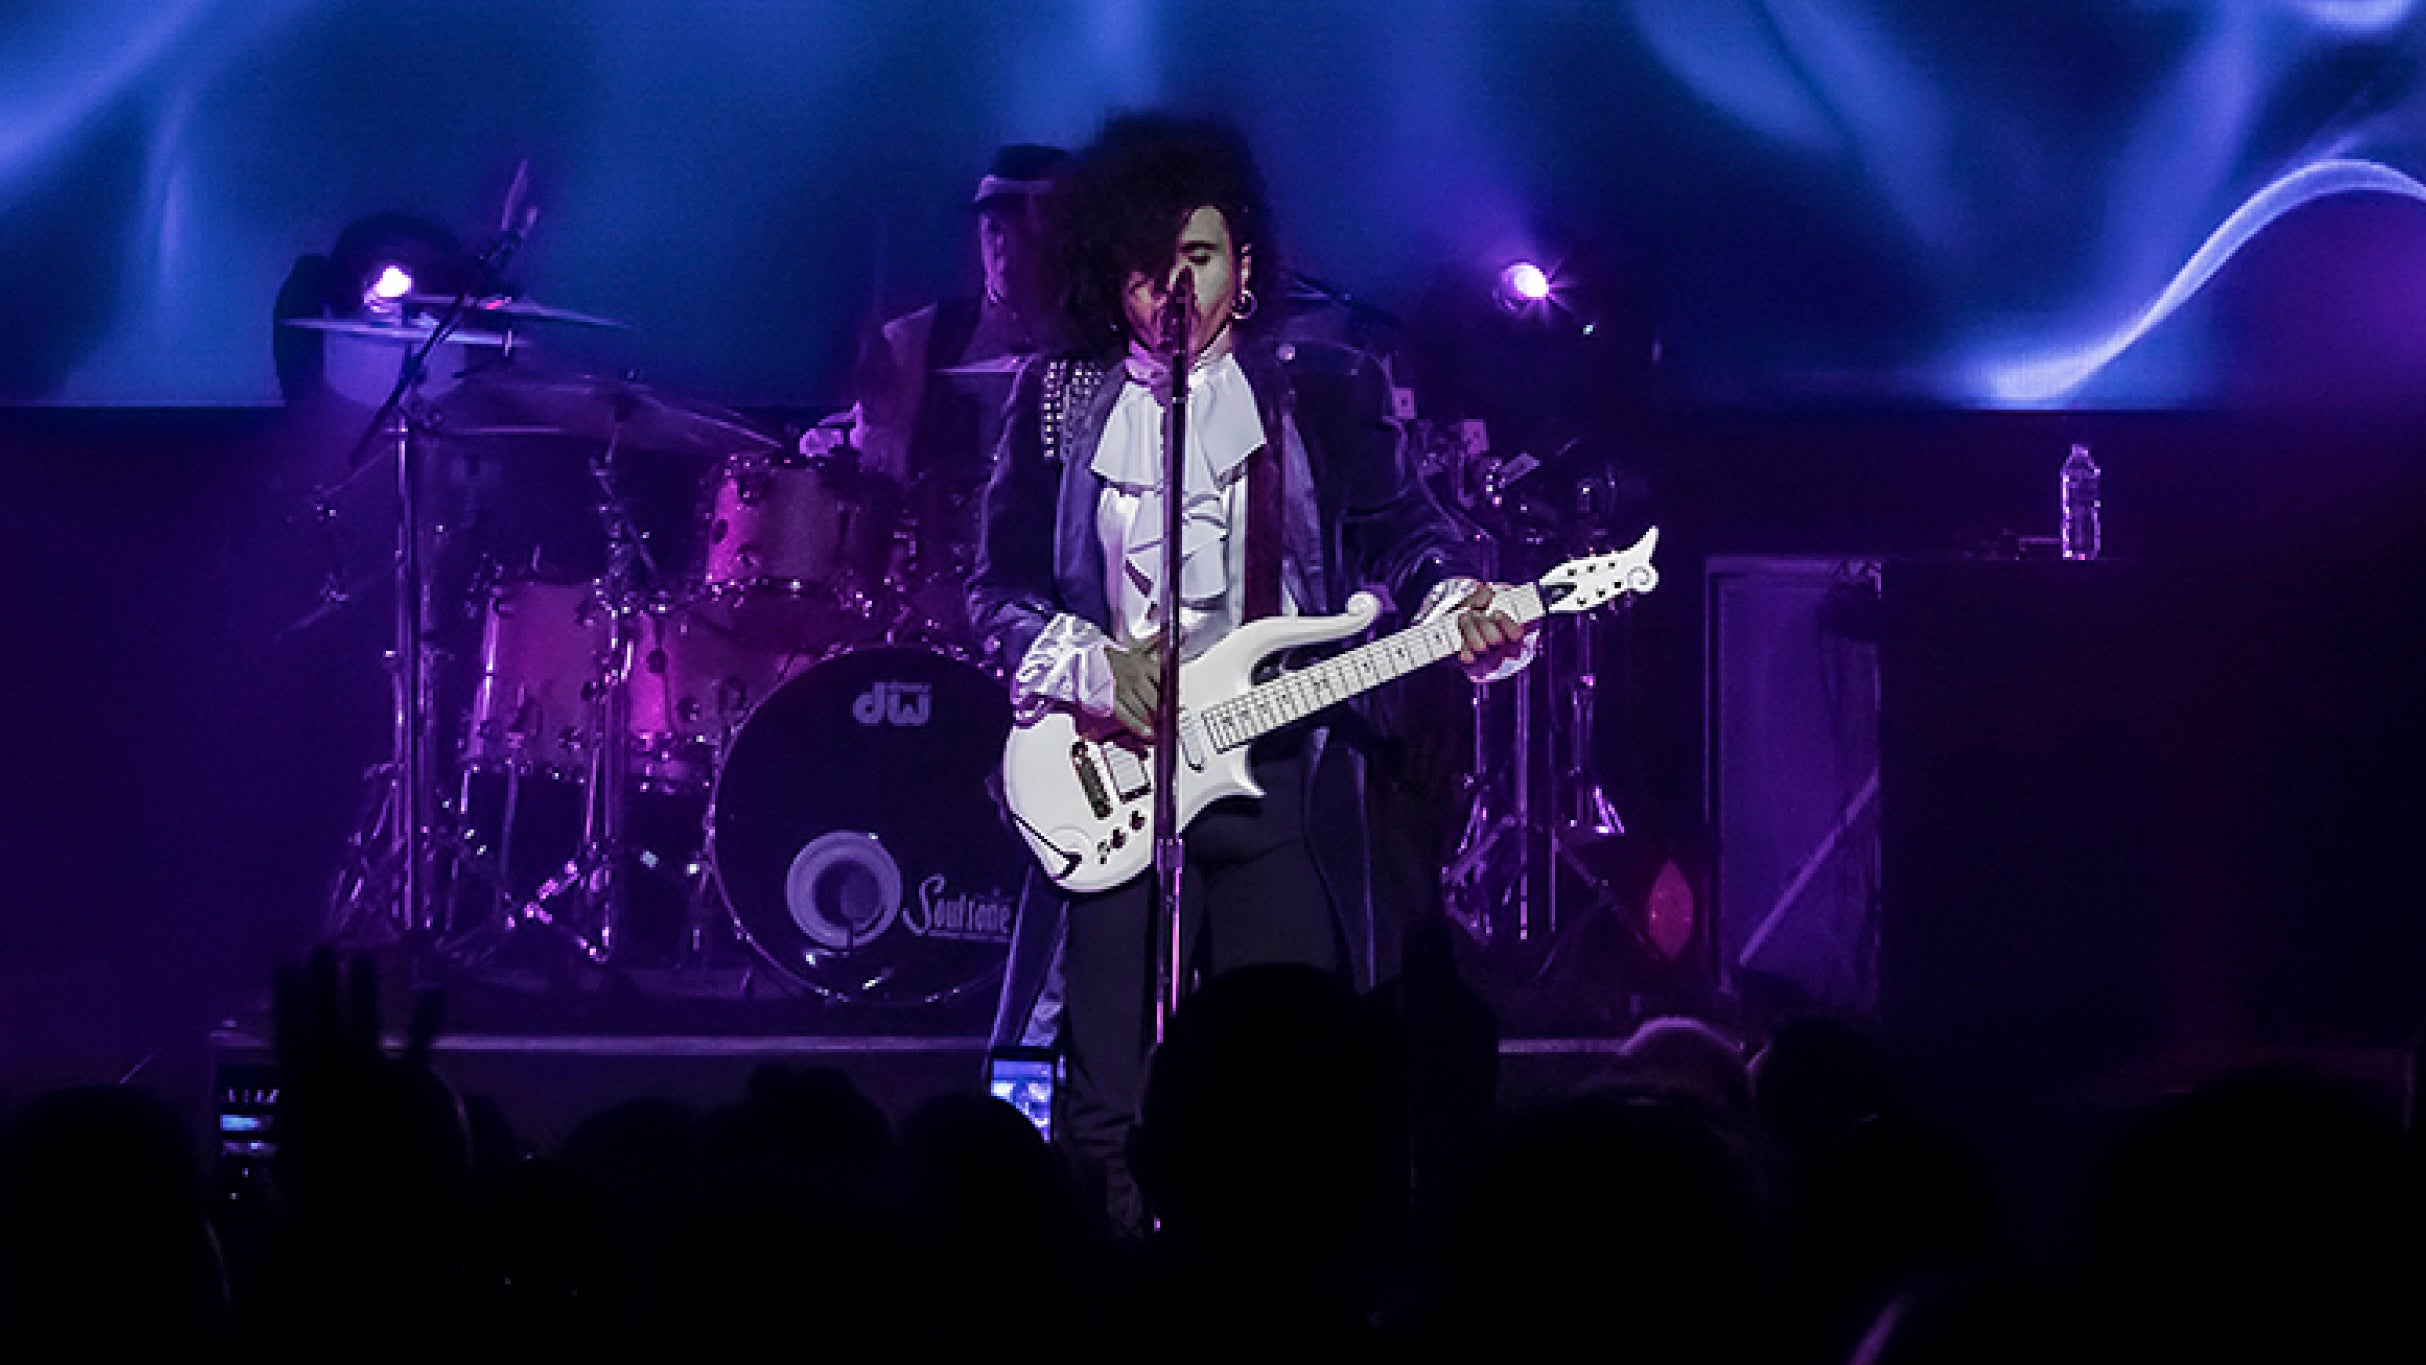 The Prince Experience at The Bluestone